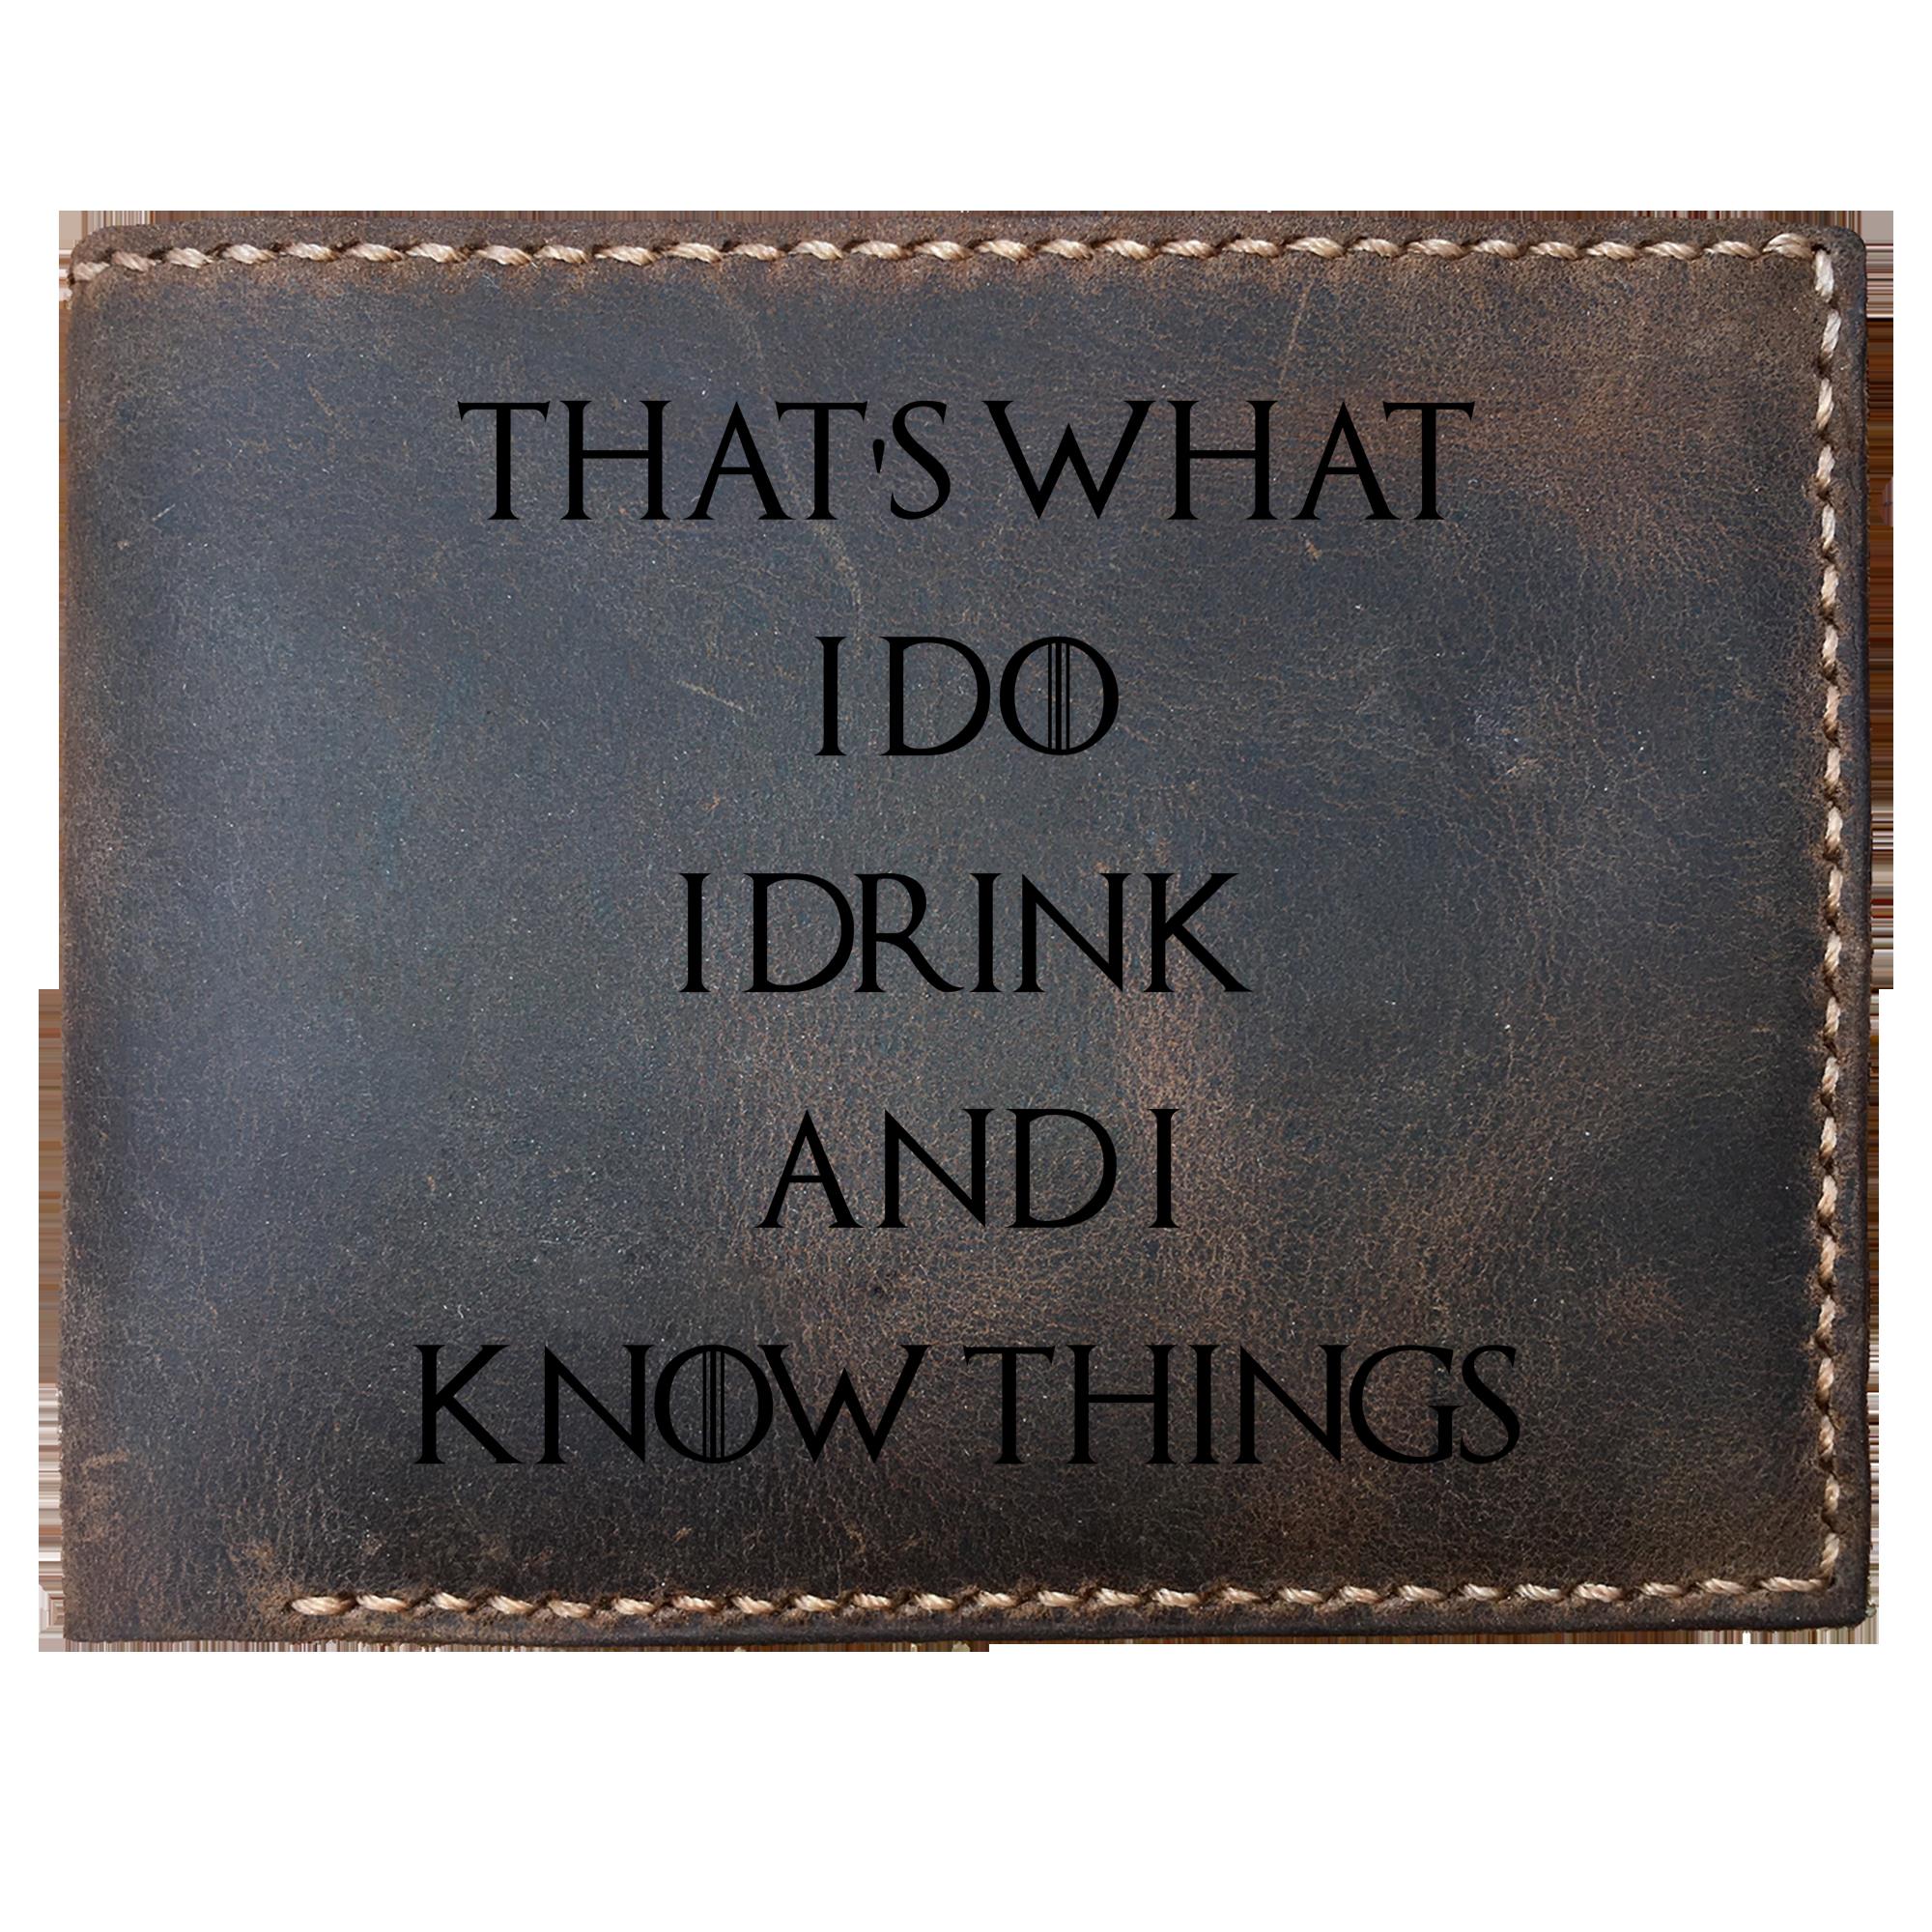 Skitongifts Funny Custom Laser Engraved Bifold Leather Wallet For Men, That's What I Do, I Drink And I Know Things